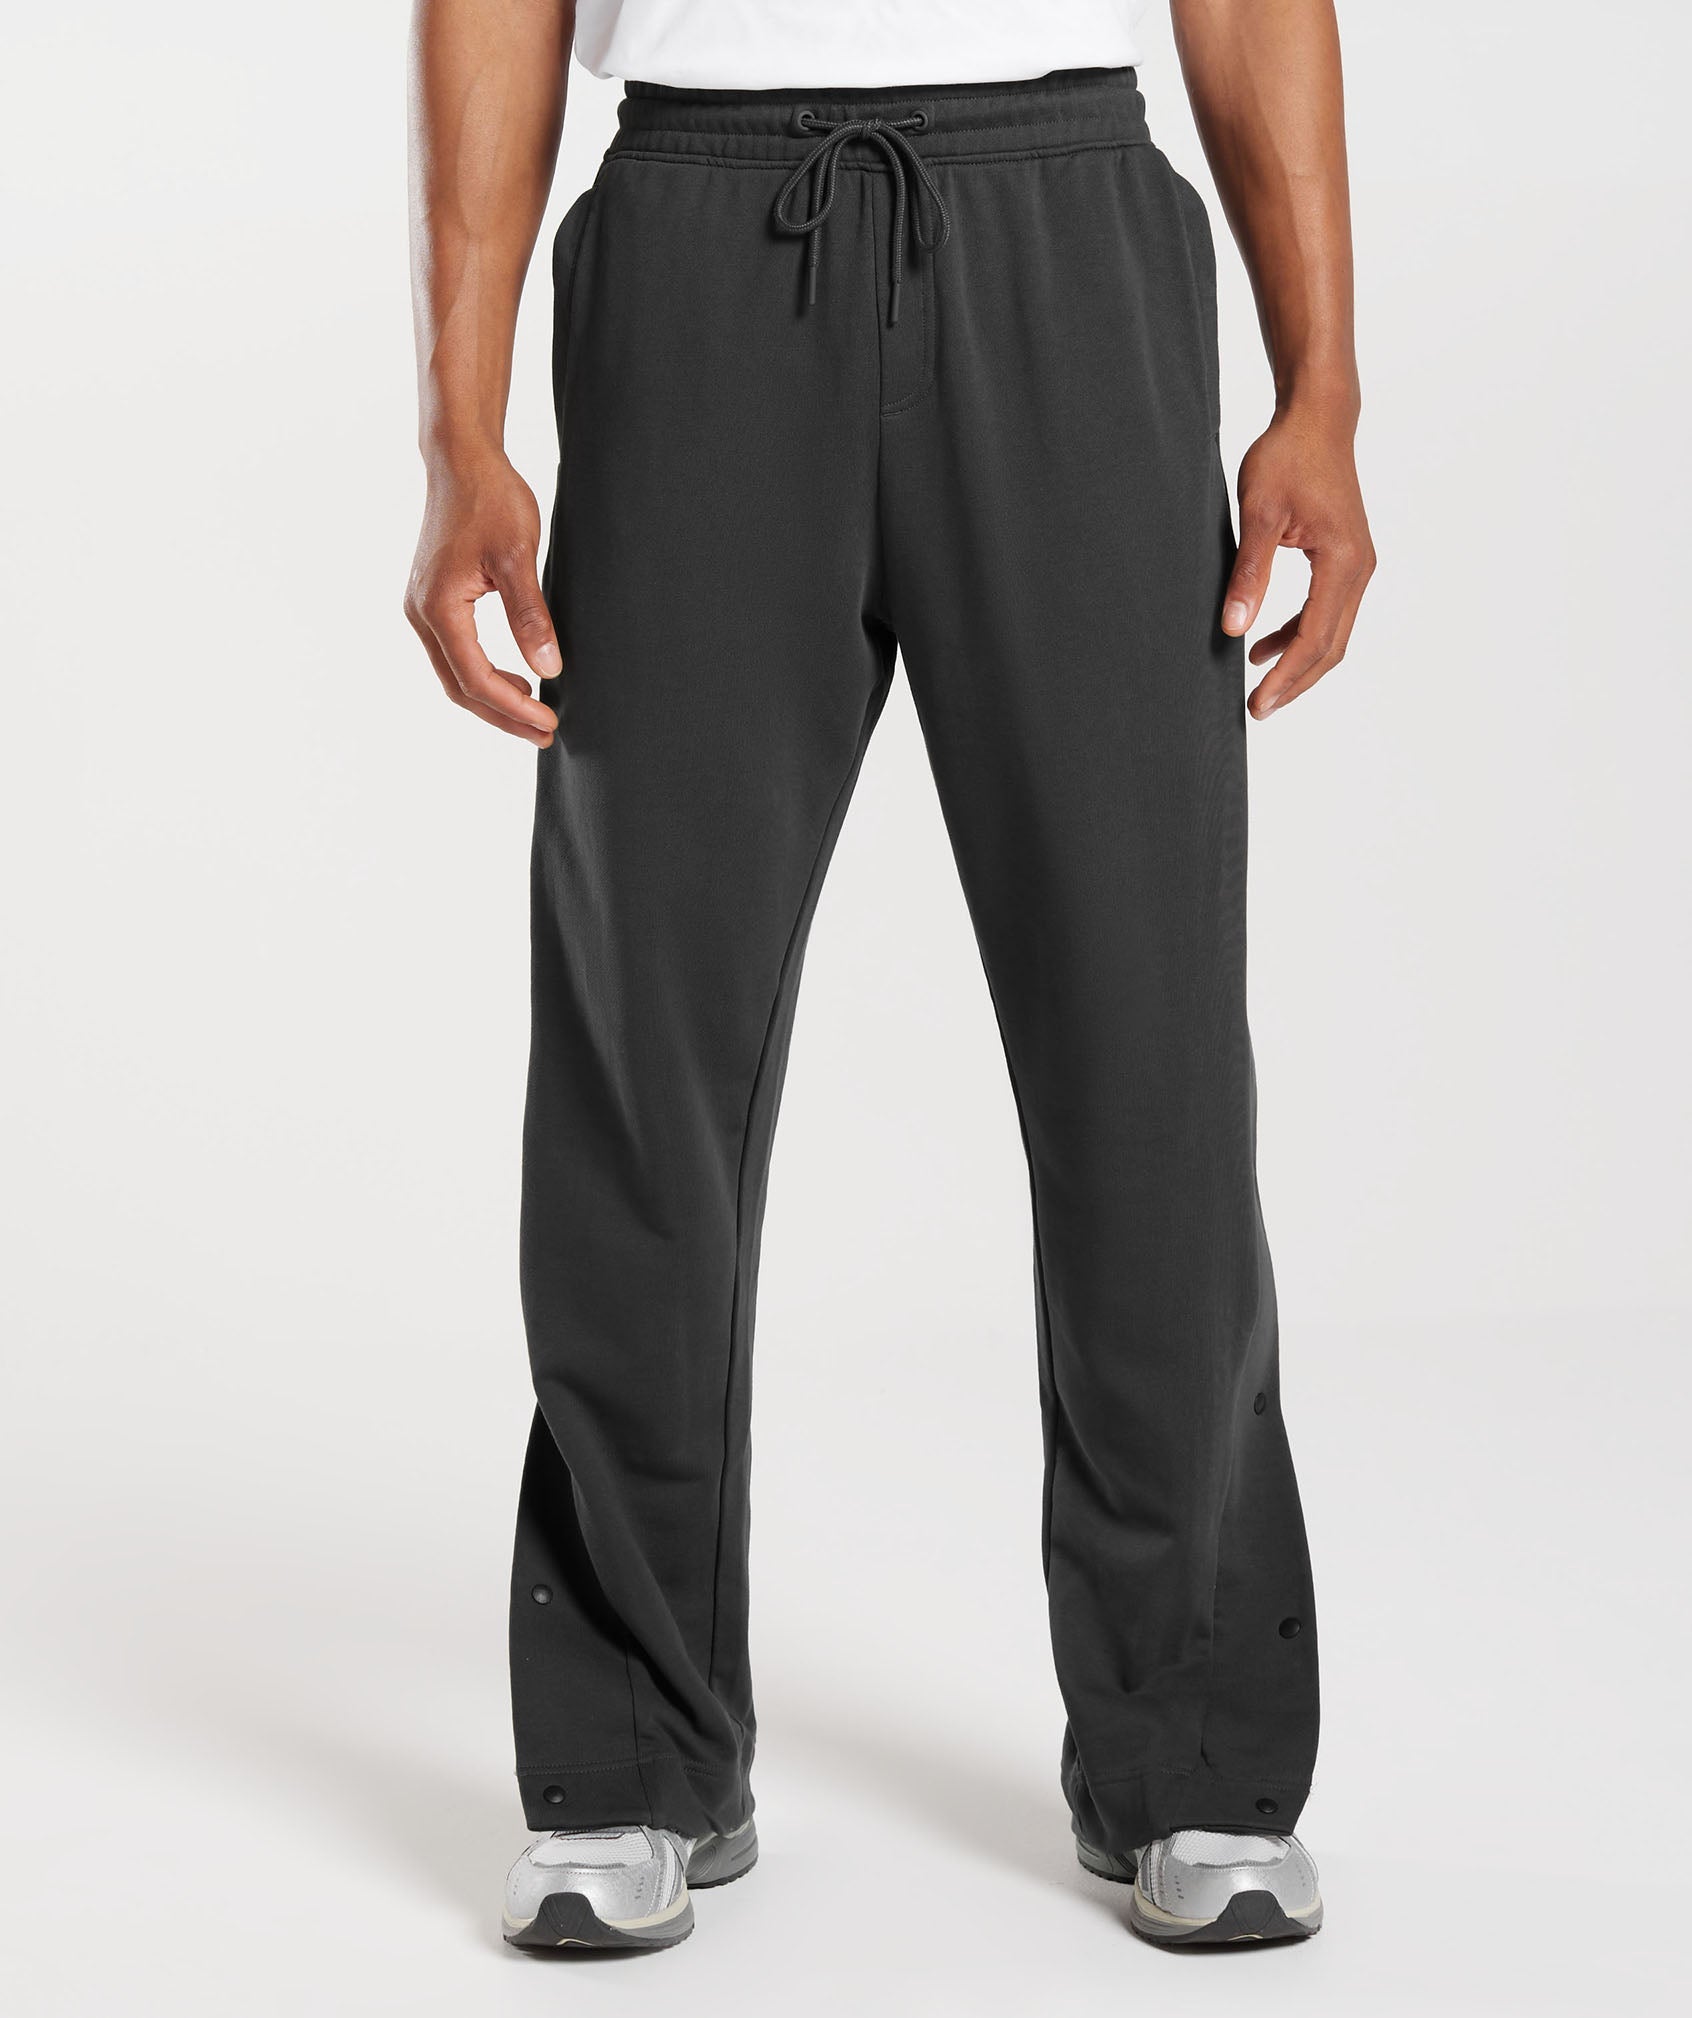 Rest Day Essentials Sweat Snap Joggers in Onyx Grey